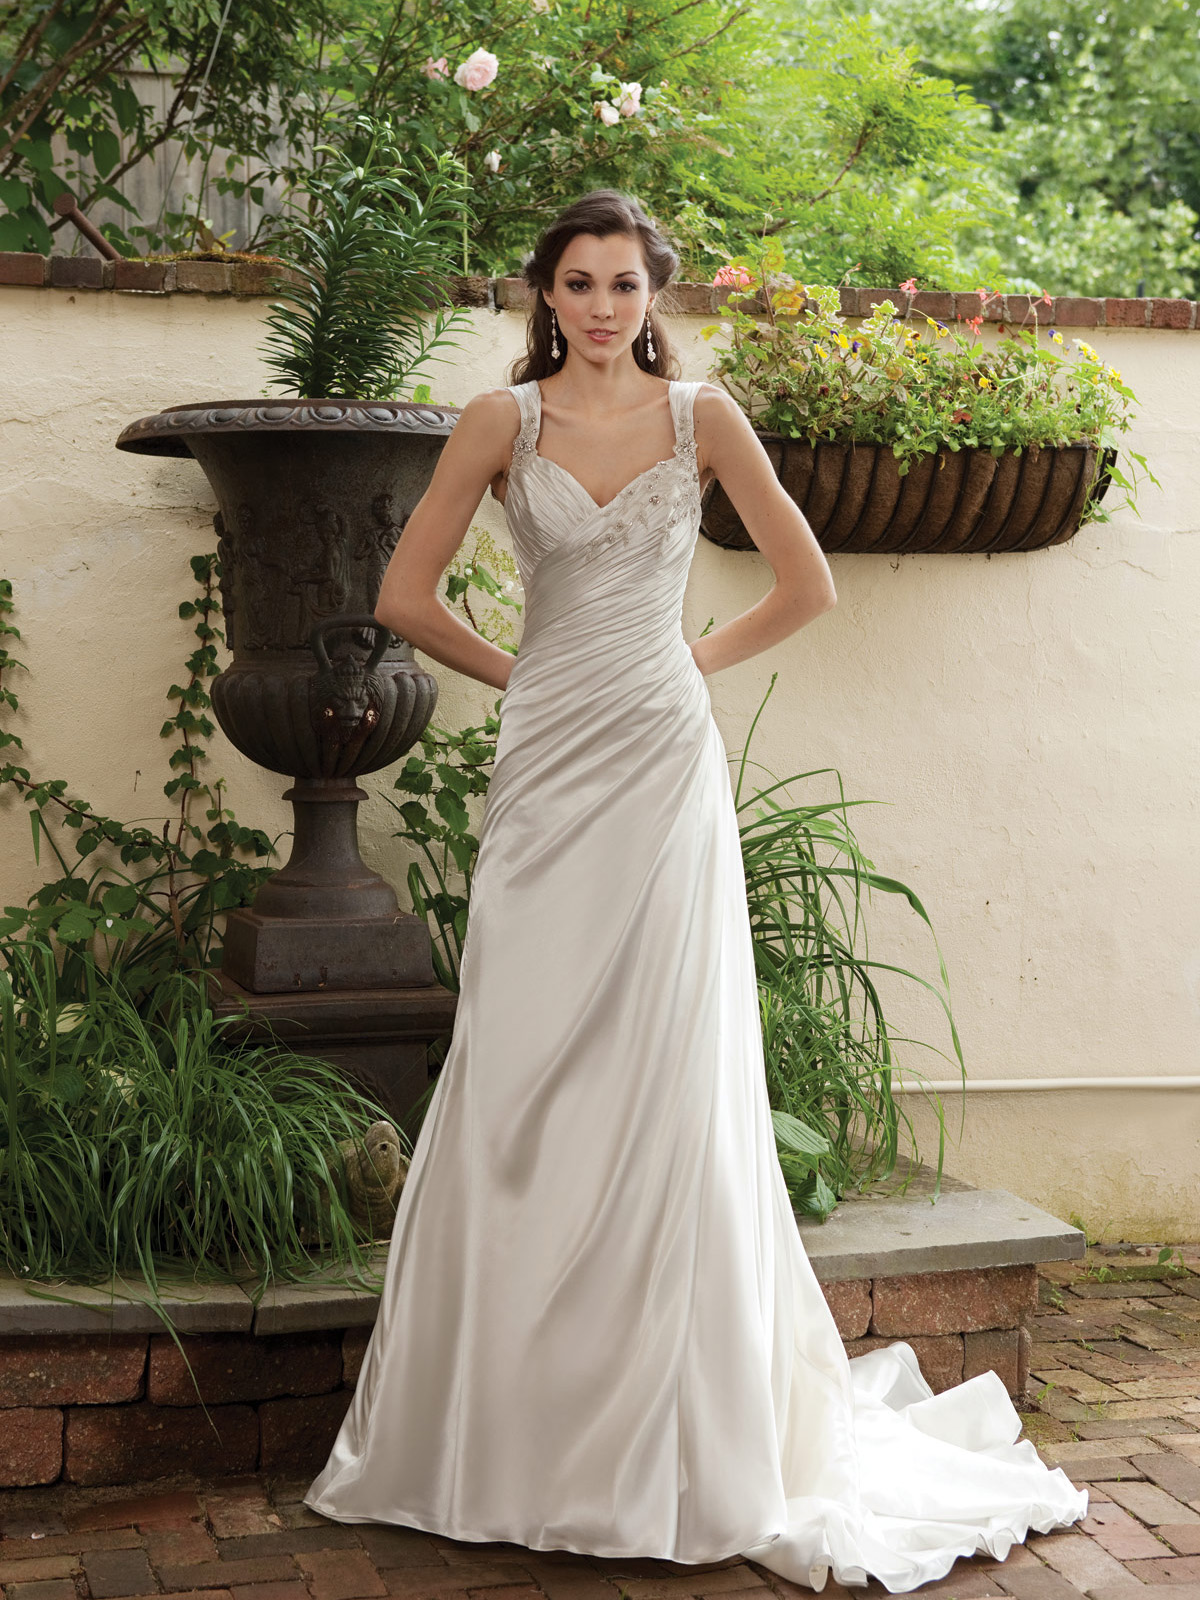 Glamorous And Gorgeous Outdoor Wedding Dresses - Ohh My My